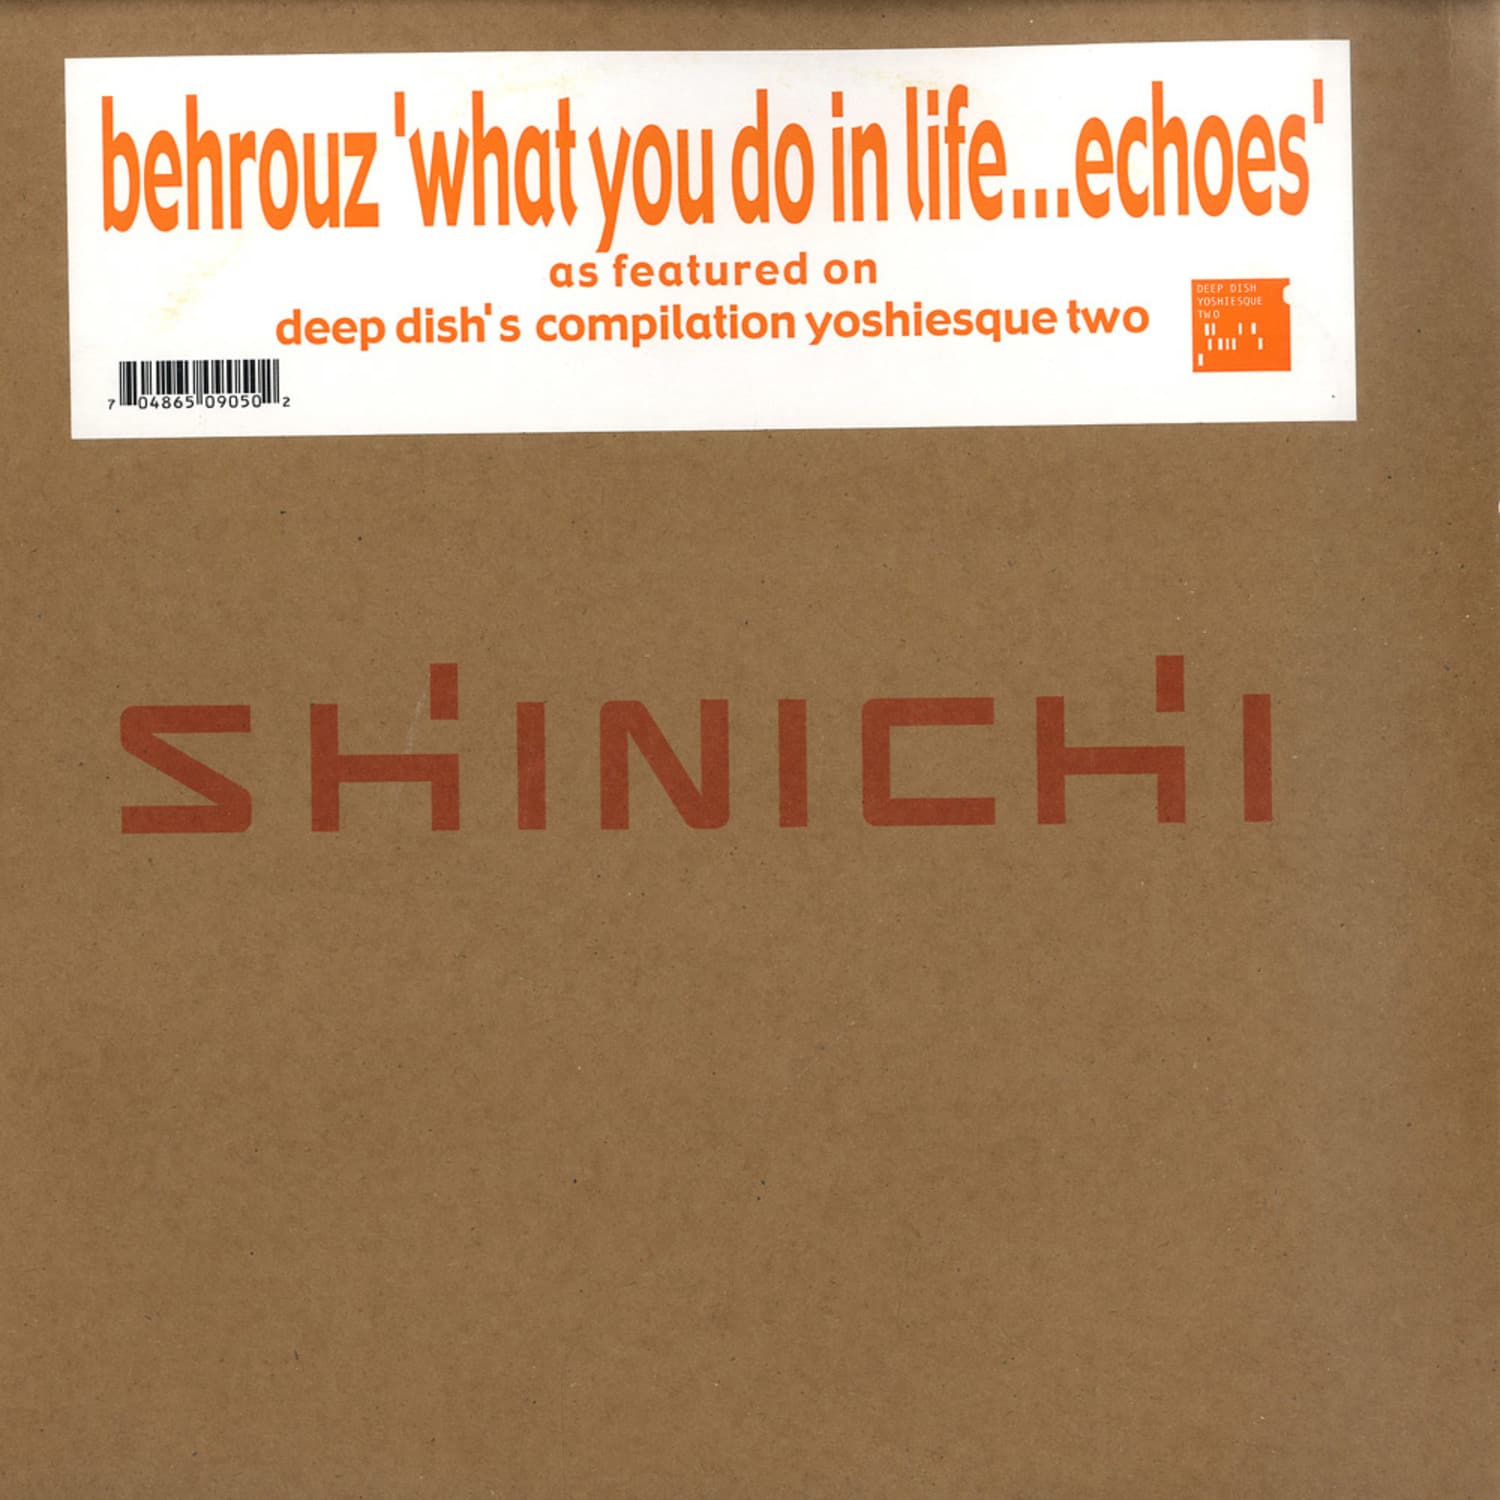 Behrouz - WHAT WE DO IN LIFE... ECHOES TO ETERNITY